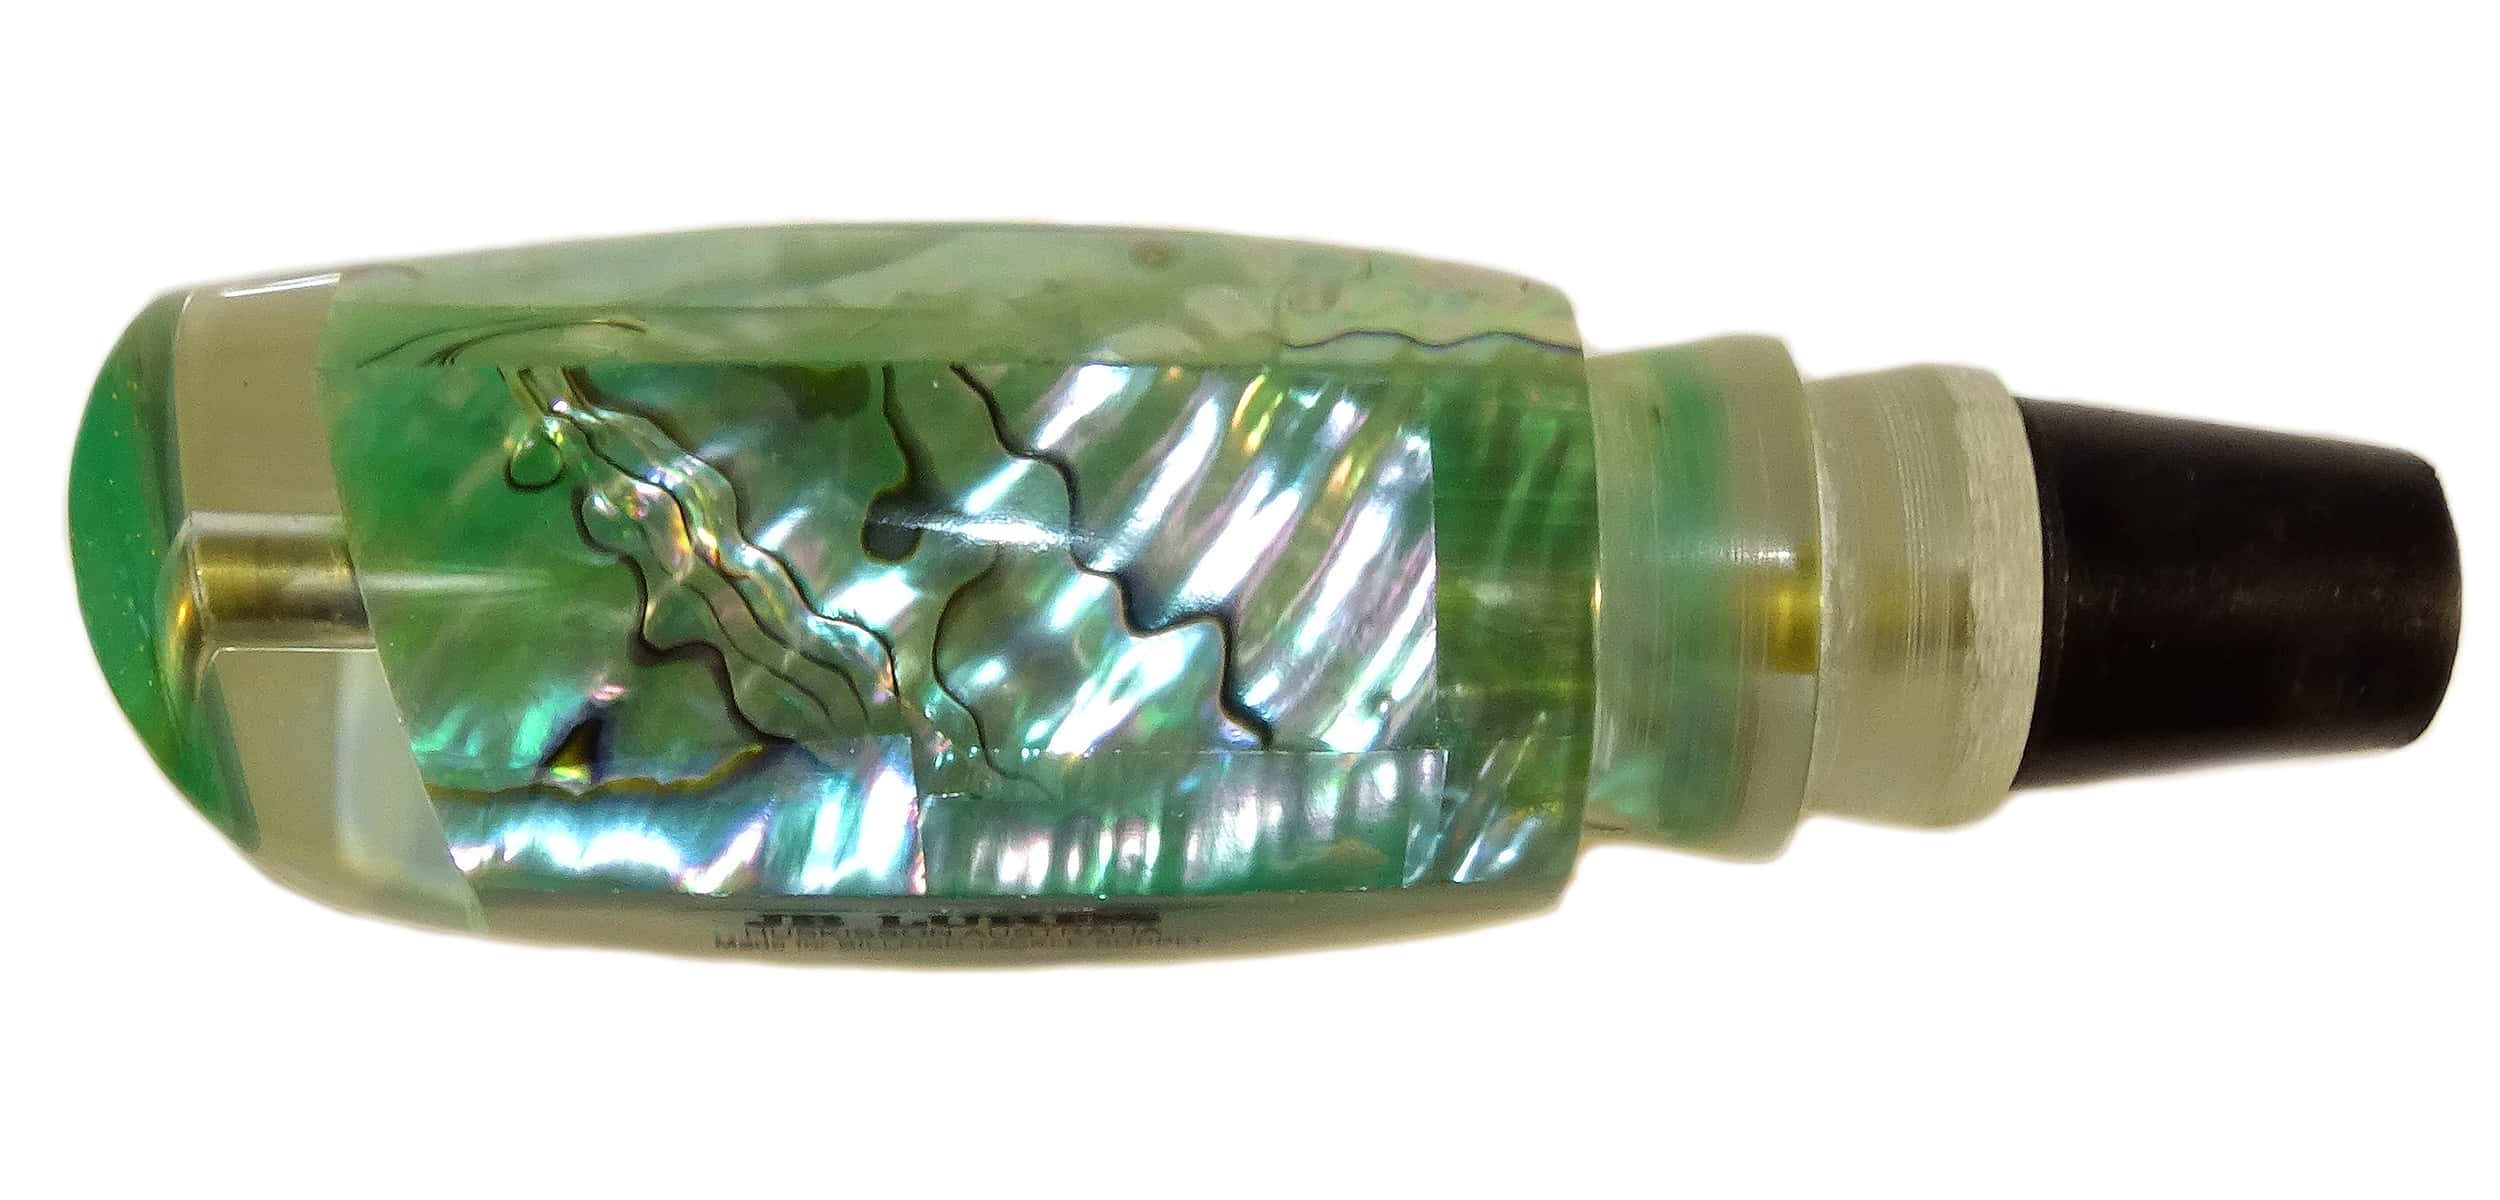 JB Lures - Chopper Series - Head - Green Insert with Raw Mexican Abalone